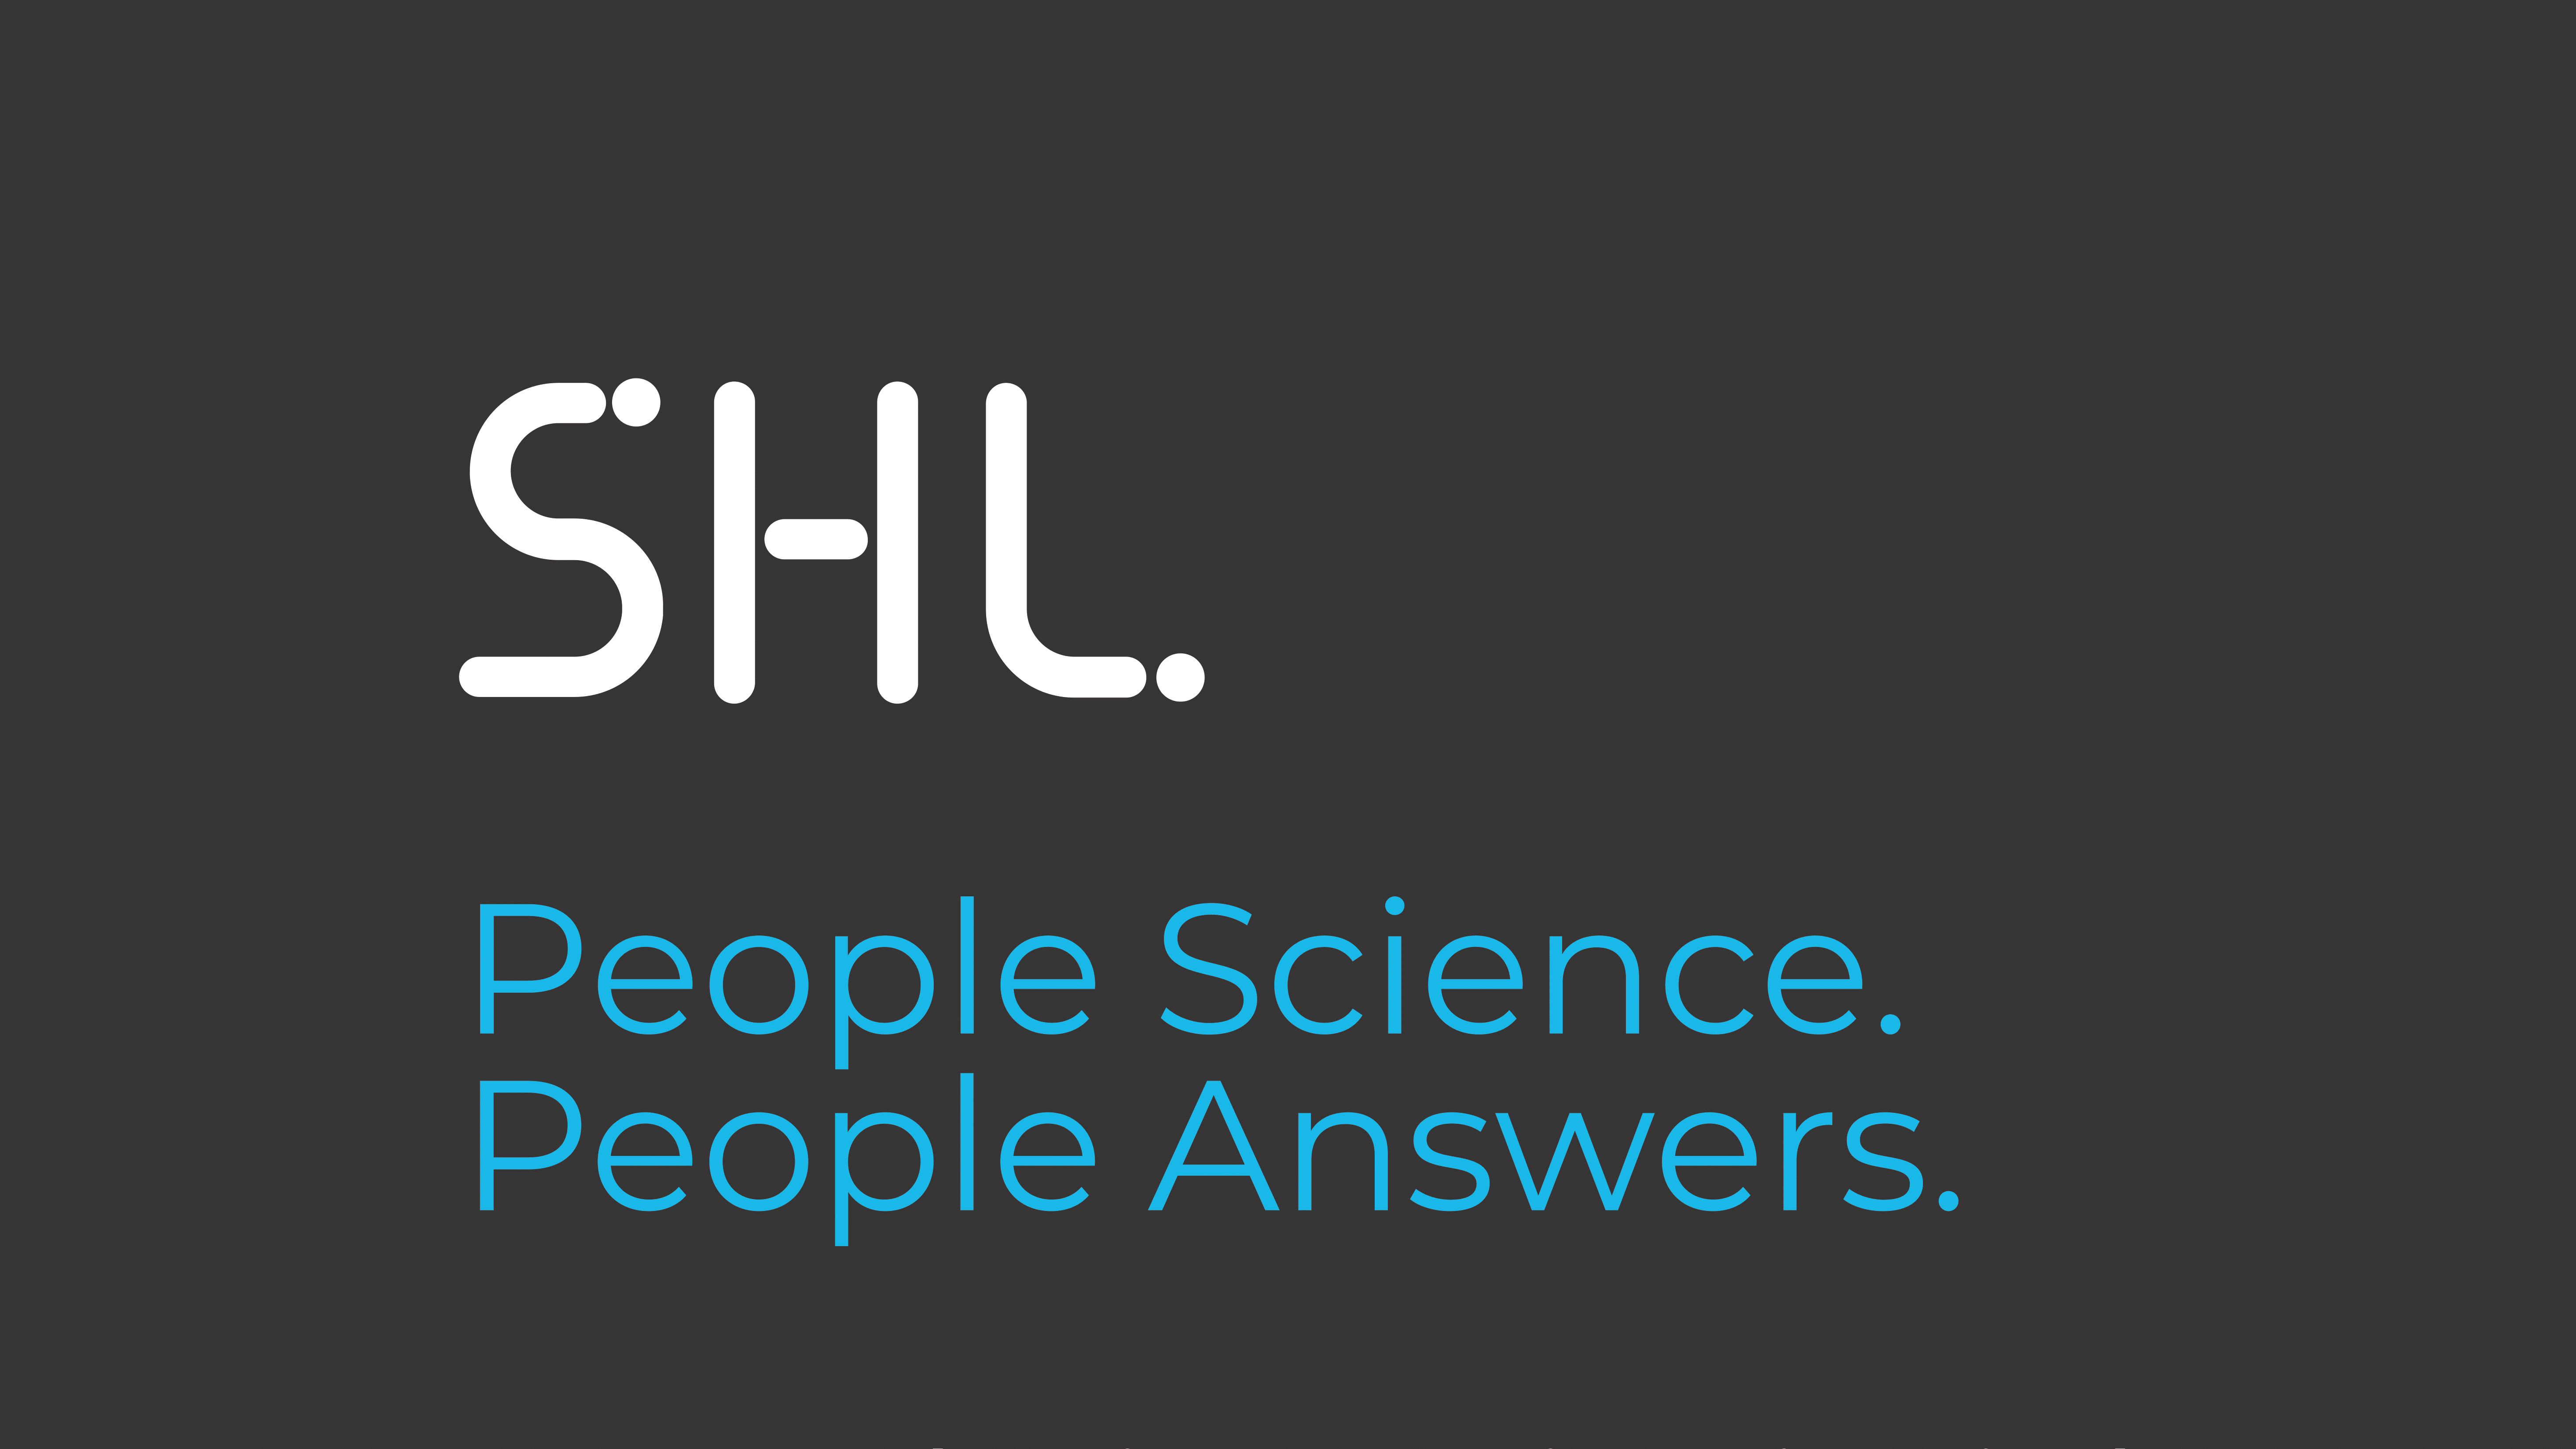 People Science. People Answers